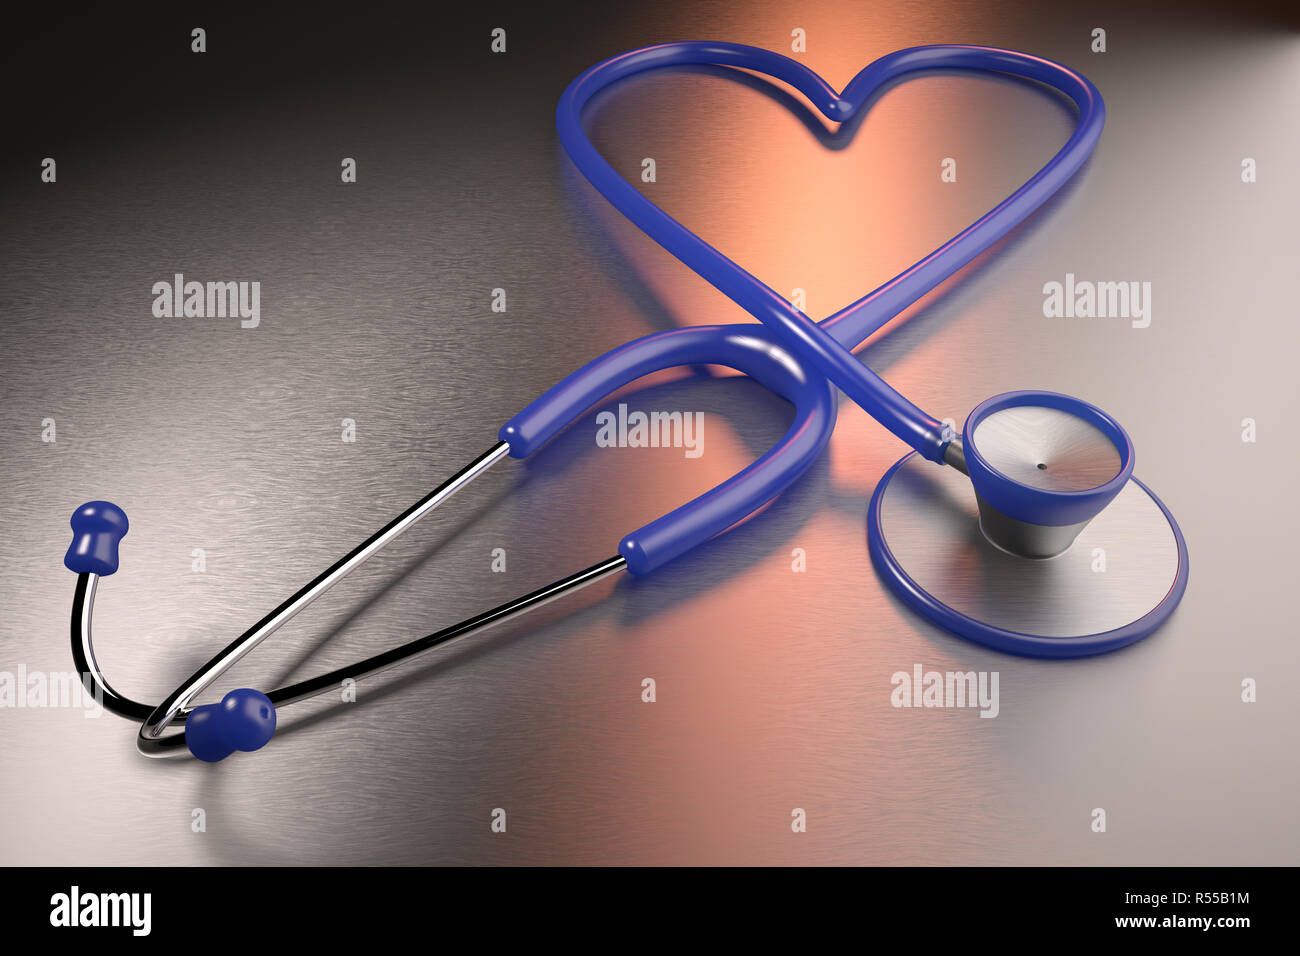 3D rendering of a heart health concept represented with a heart shaped stethoscope Stock Photo